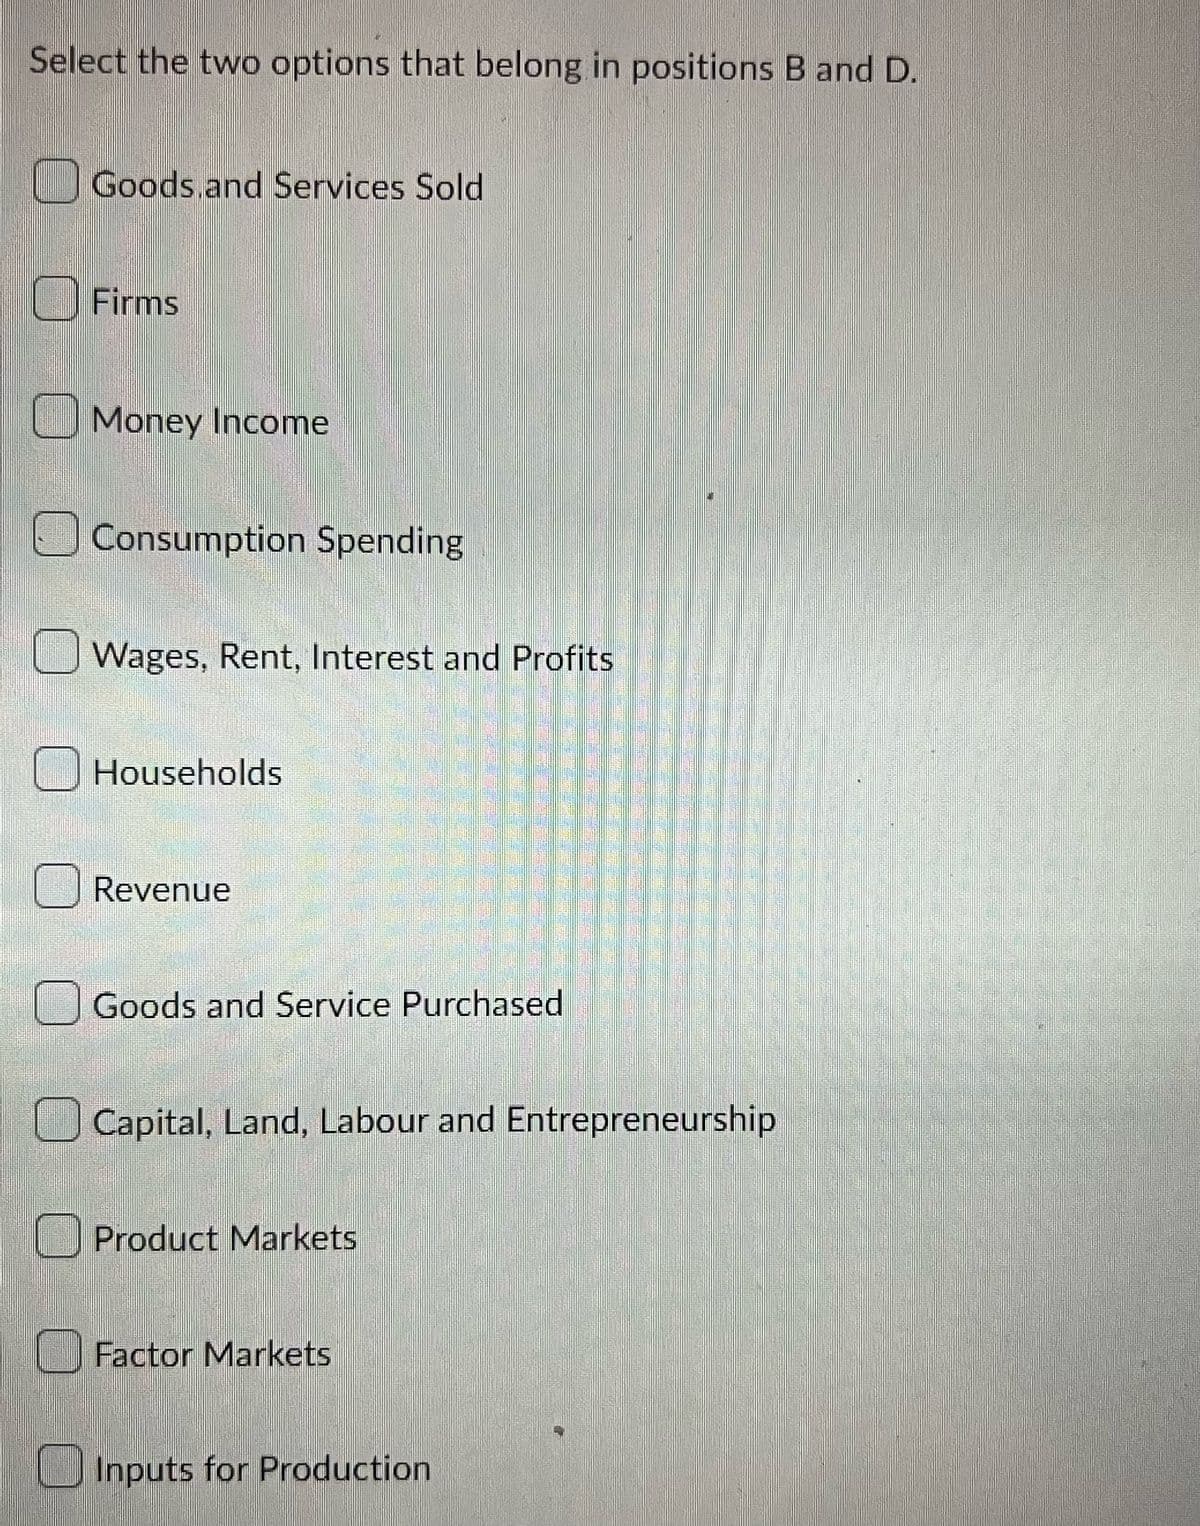 Select the two options that belong in positions B and D.
Goods and Services Sold
Firms
Money Income
Consumption Spending
Wages, Rent, Interest and Profits
Households
Revenue
Goods and Service Purchased
Capital, Land, Labour and Entrepreneurship
Product Markets
Factor Markets
Inputs for Production